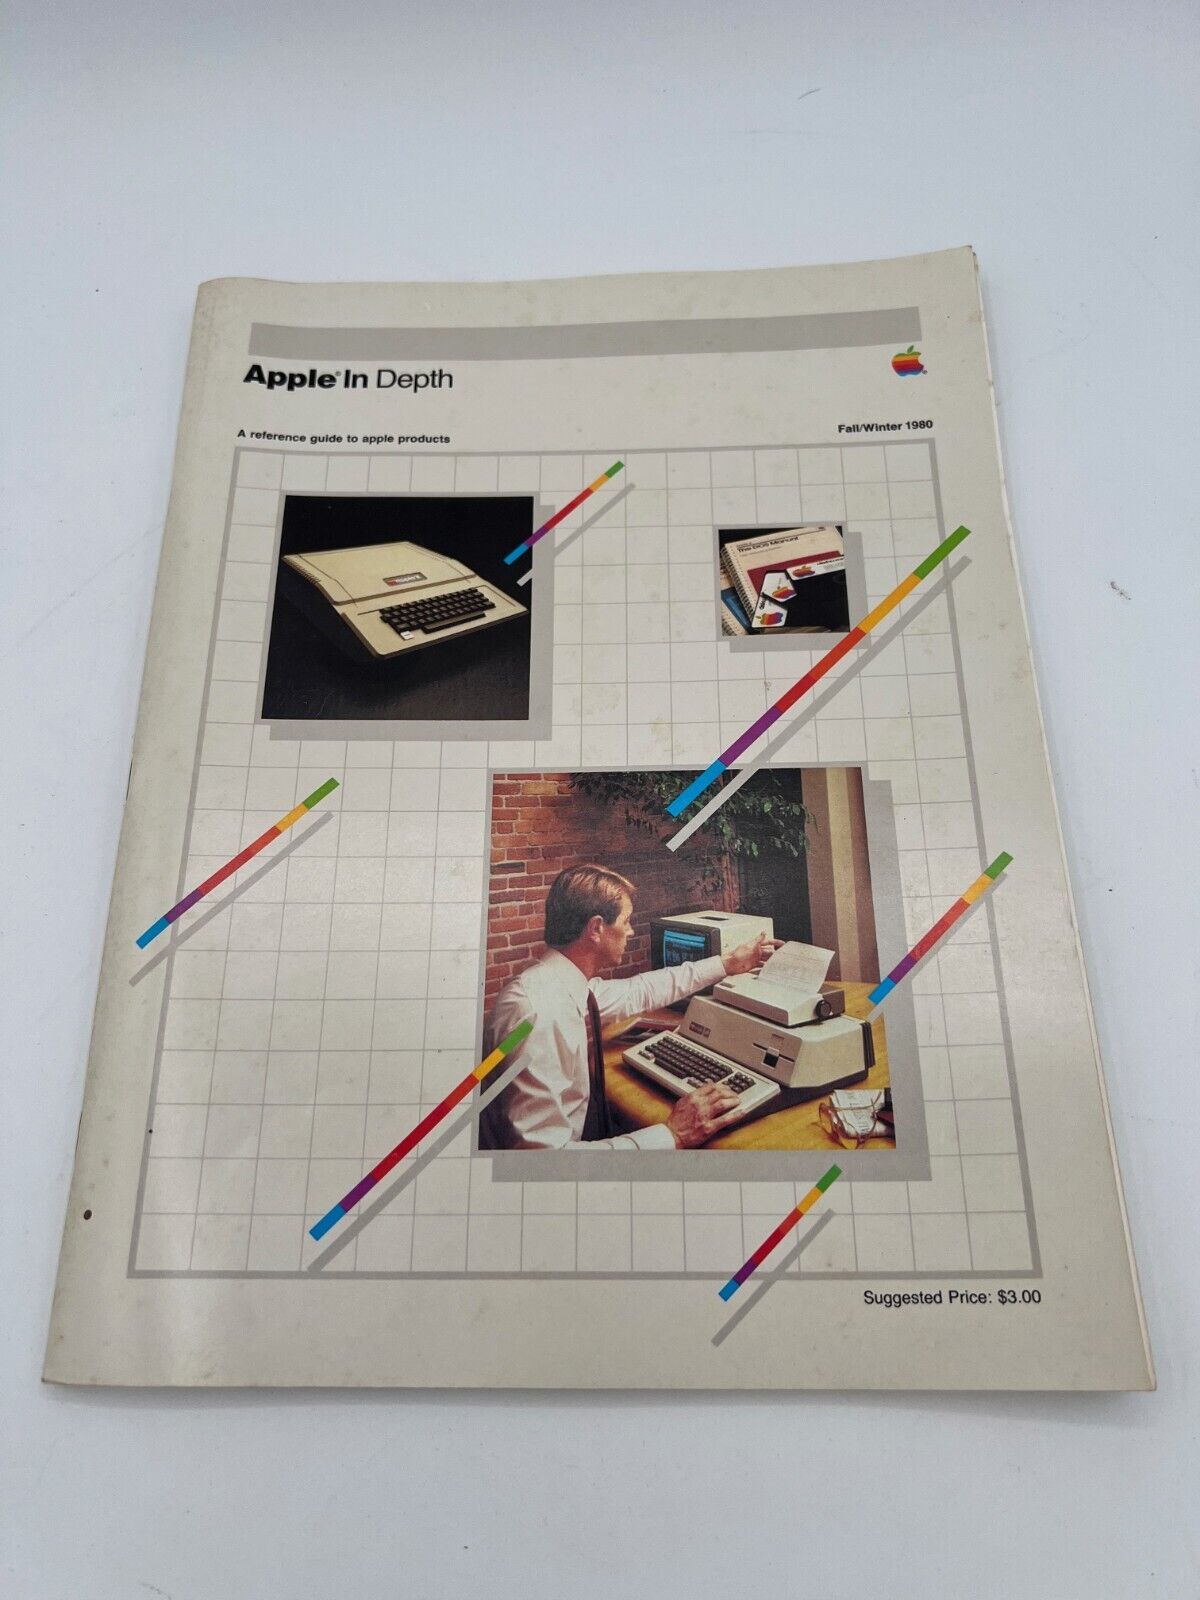 Apple In Depth Magazine Computer Products Catalog Guide Fall/Winter 1980 103 pgs